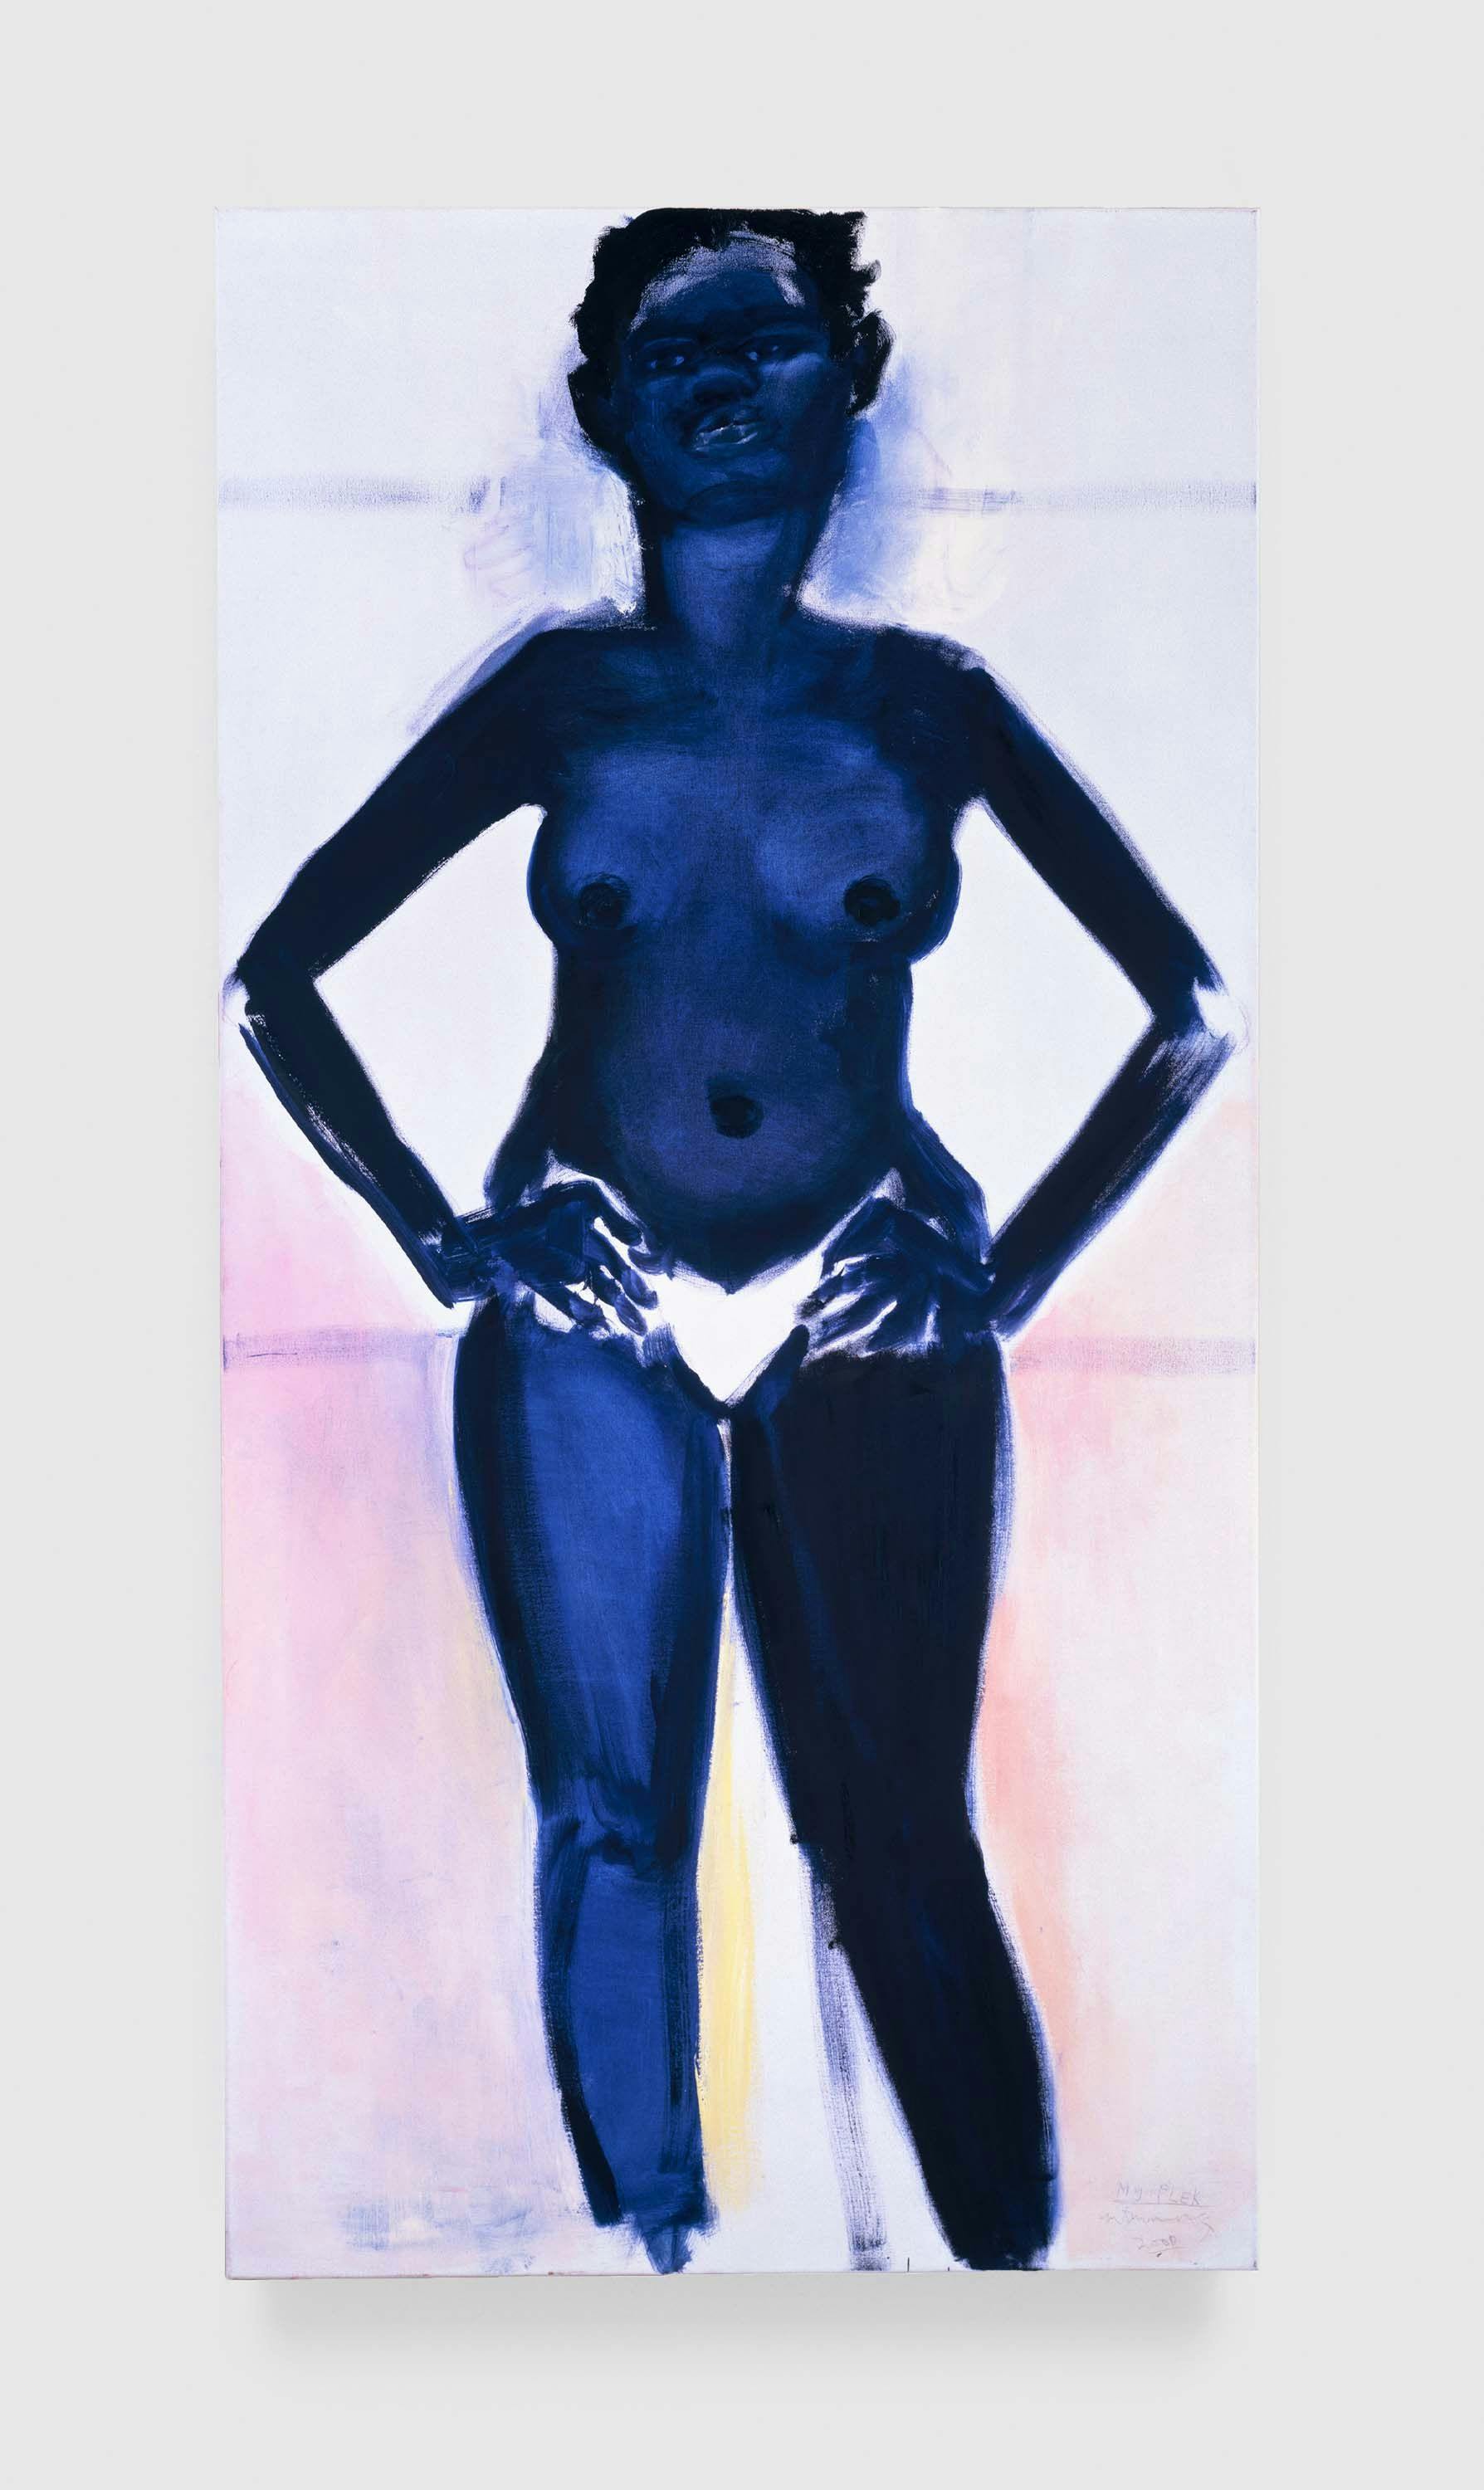 A painting by Marlene Dumas, titled My Plek (My Place), dated 2000.